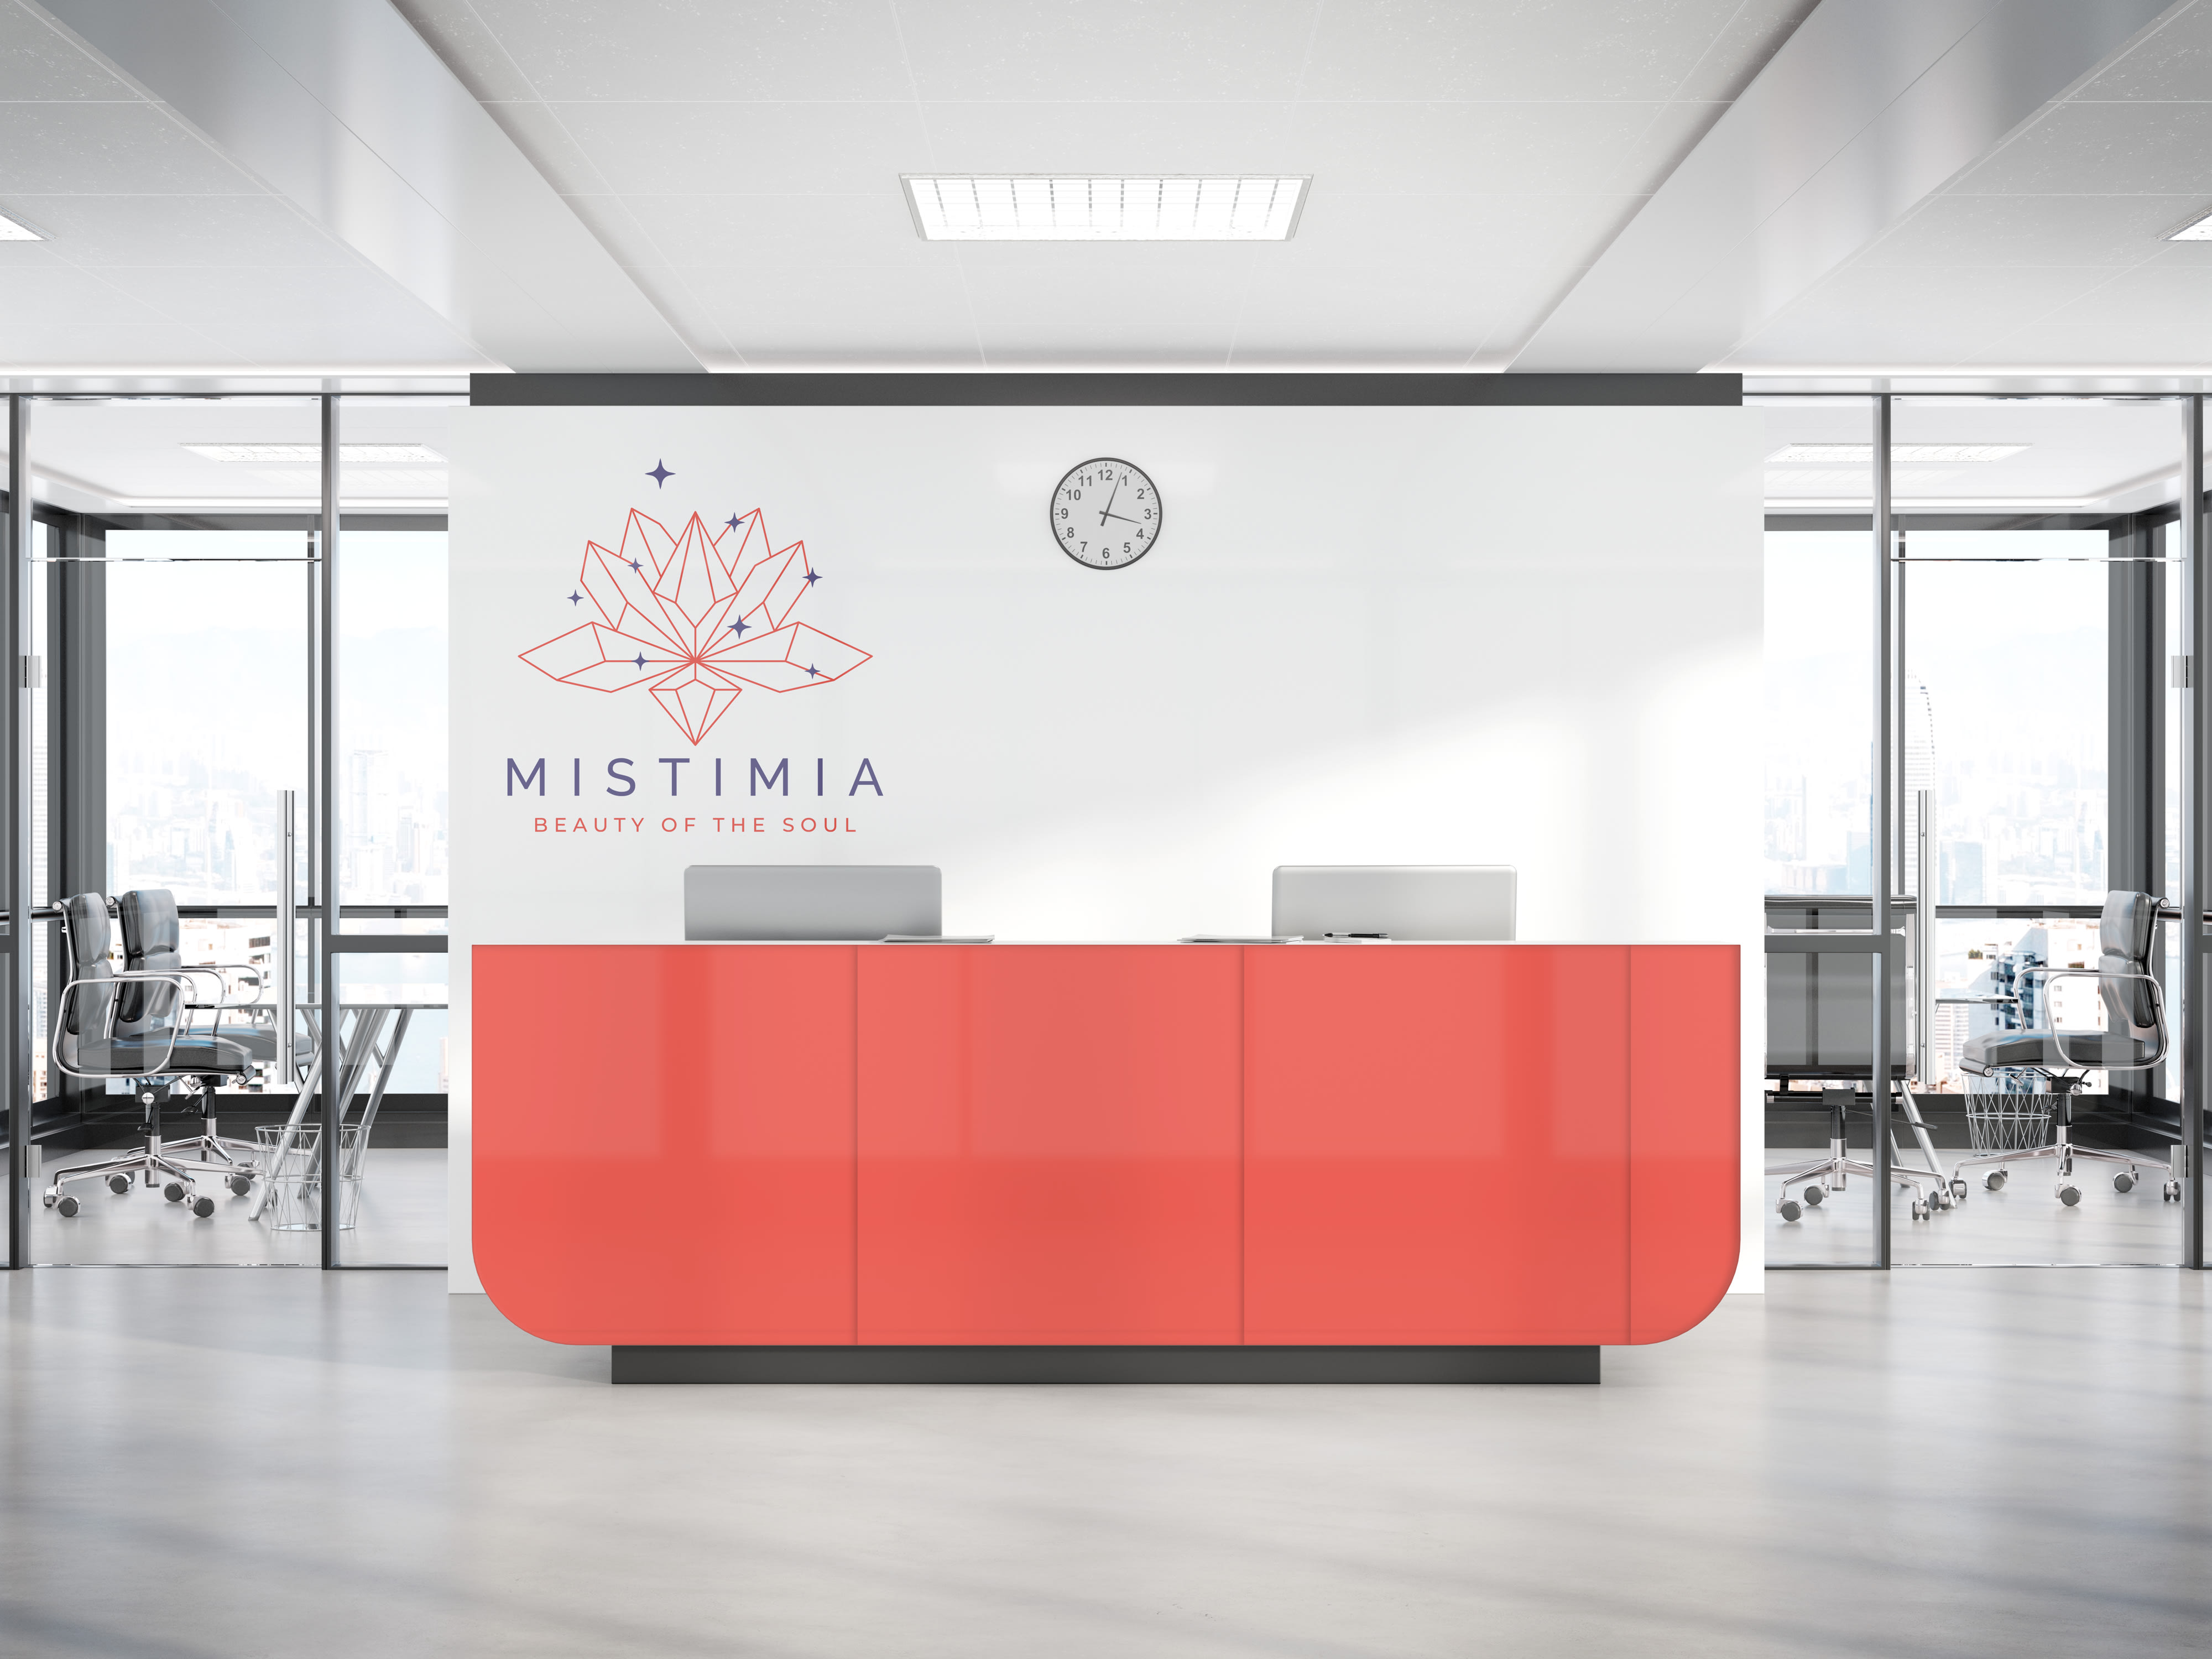 Download Mockup Your Logo Or Artwork On 15 Office Reception Interiors By Ds01steve Fiverr